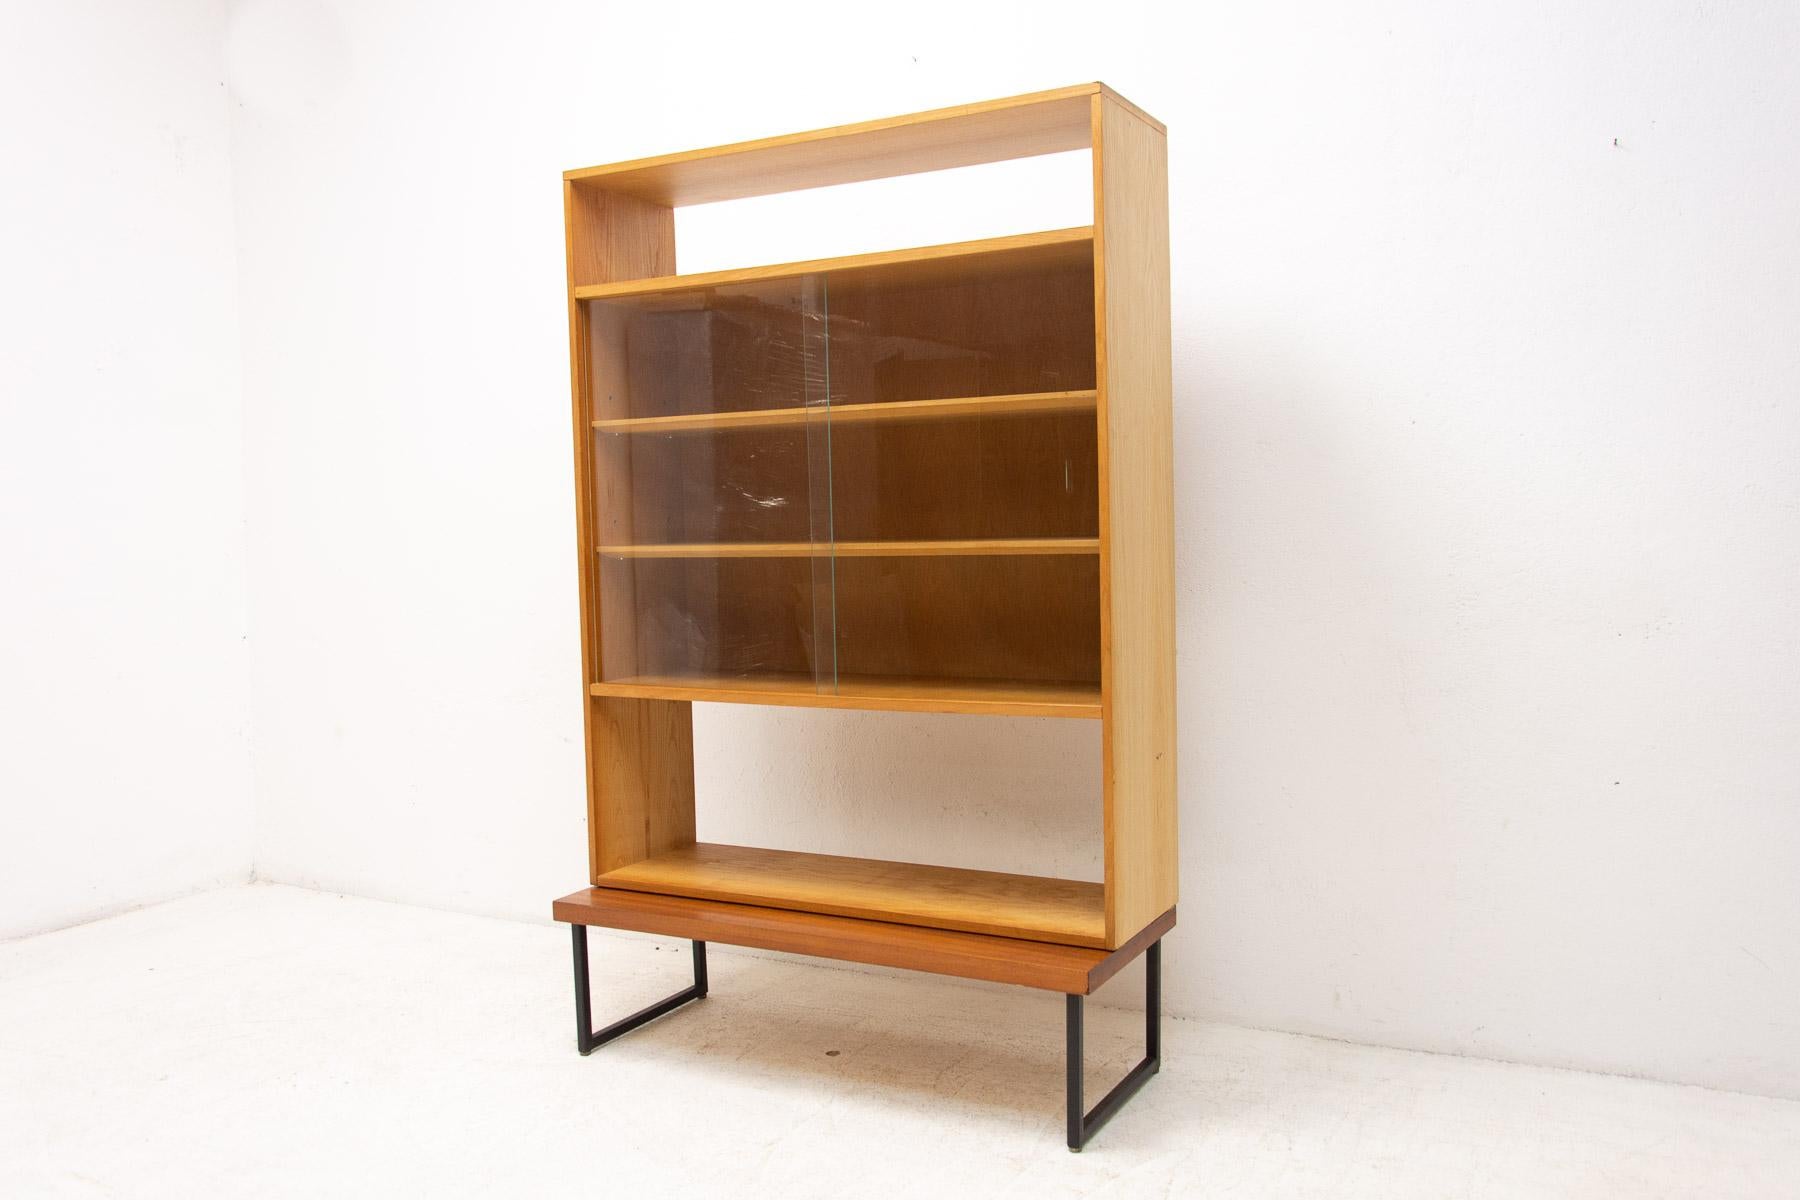 Czechoslovakia, 1970´s. Lovely modern piece of furniture. This piece consists of two separated parts: a mahagony plinth(side table) in the lower part and of the top glazed section. Made of beechwood, mahogany and iron. Very good condition

Height: